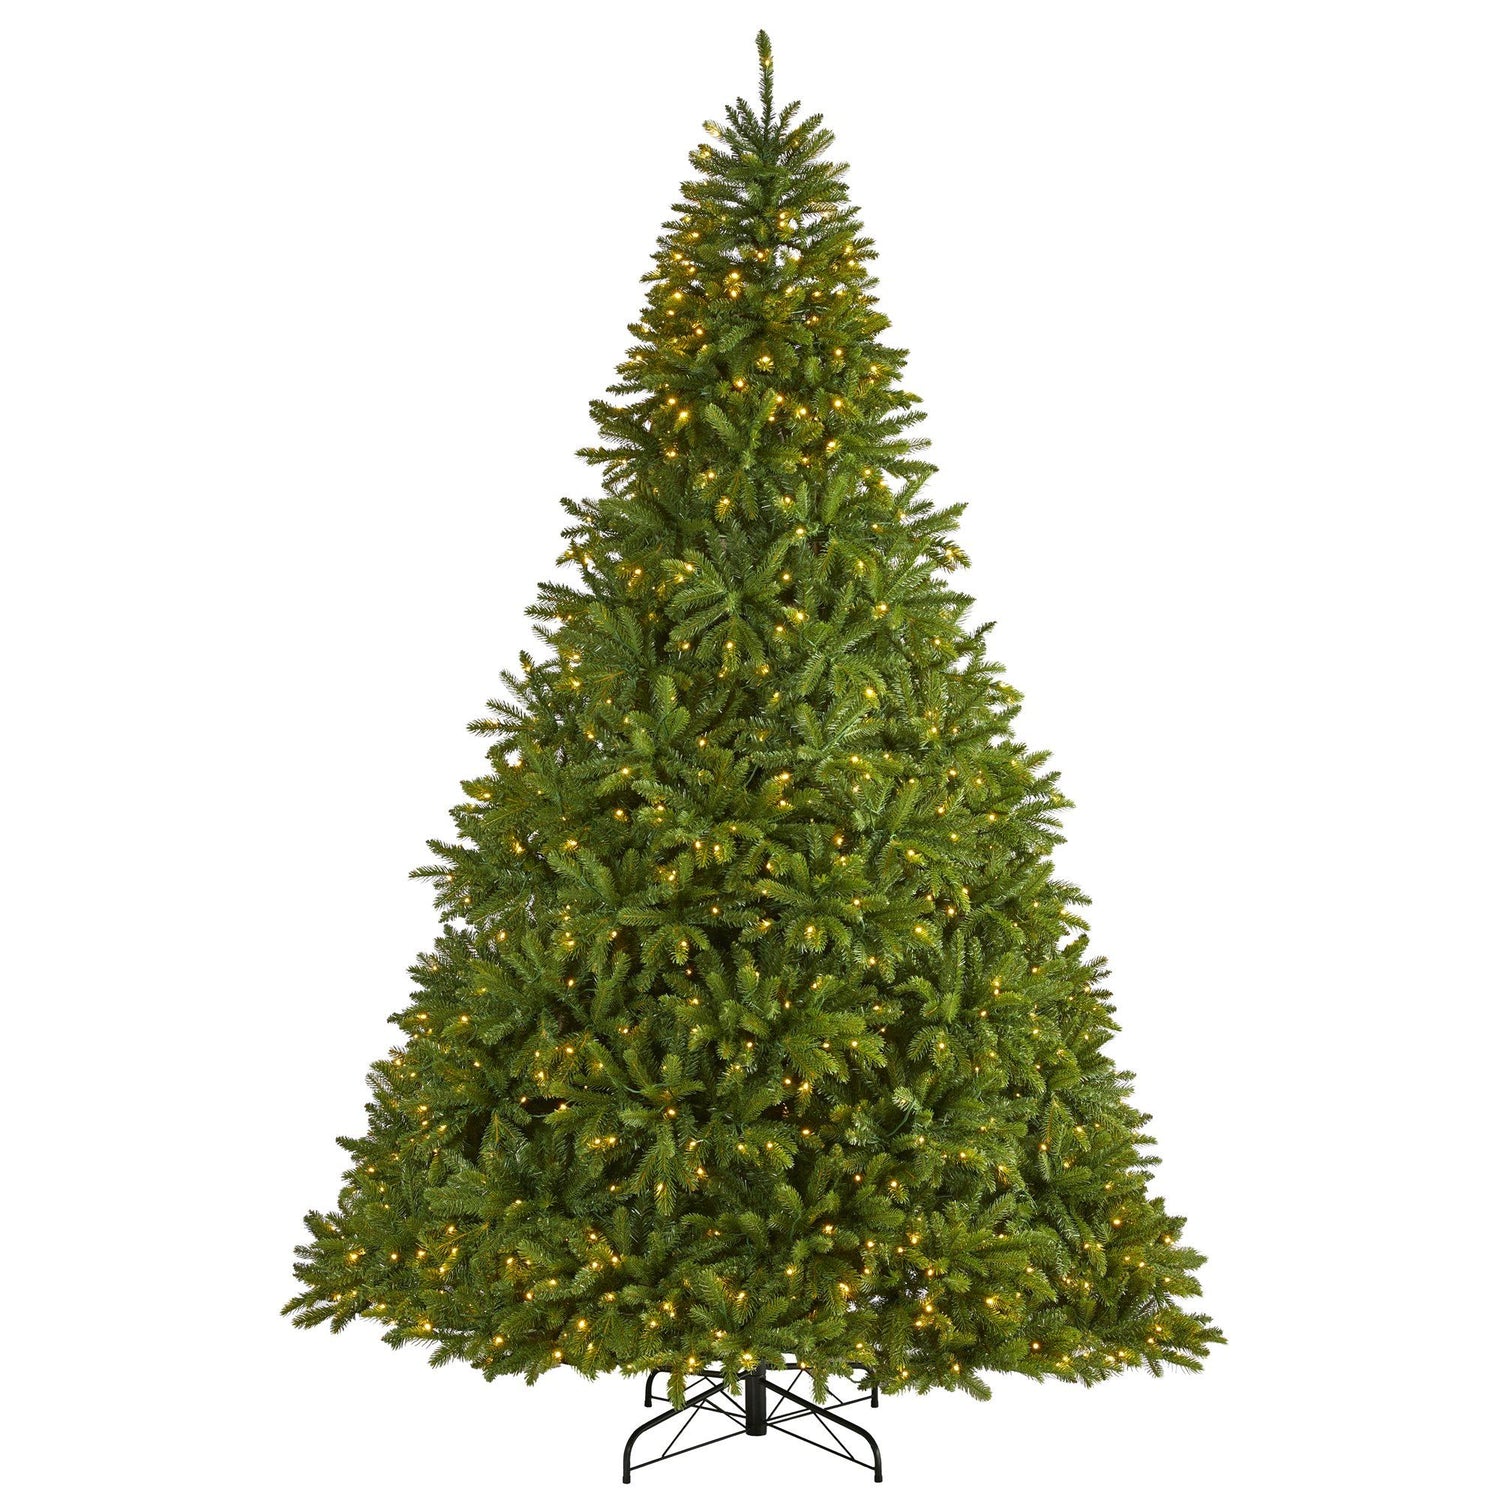 9’ Sierra Spruce “Natural Look” Artificial Christmas Tree with 1000 Clear LED Lights and 4443 Tips